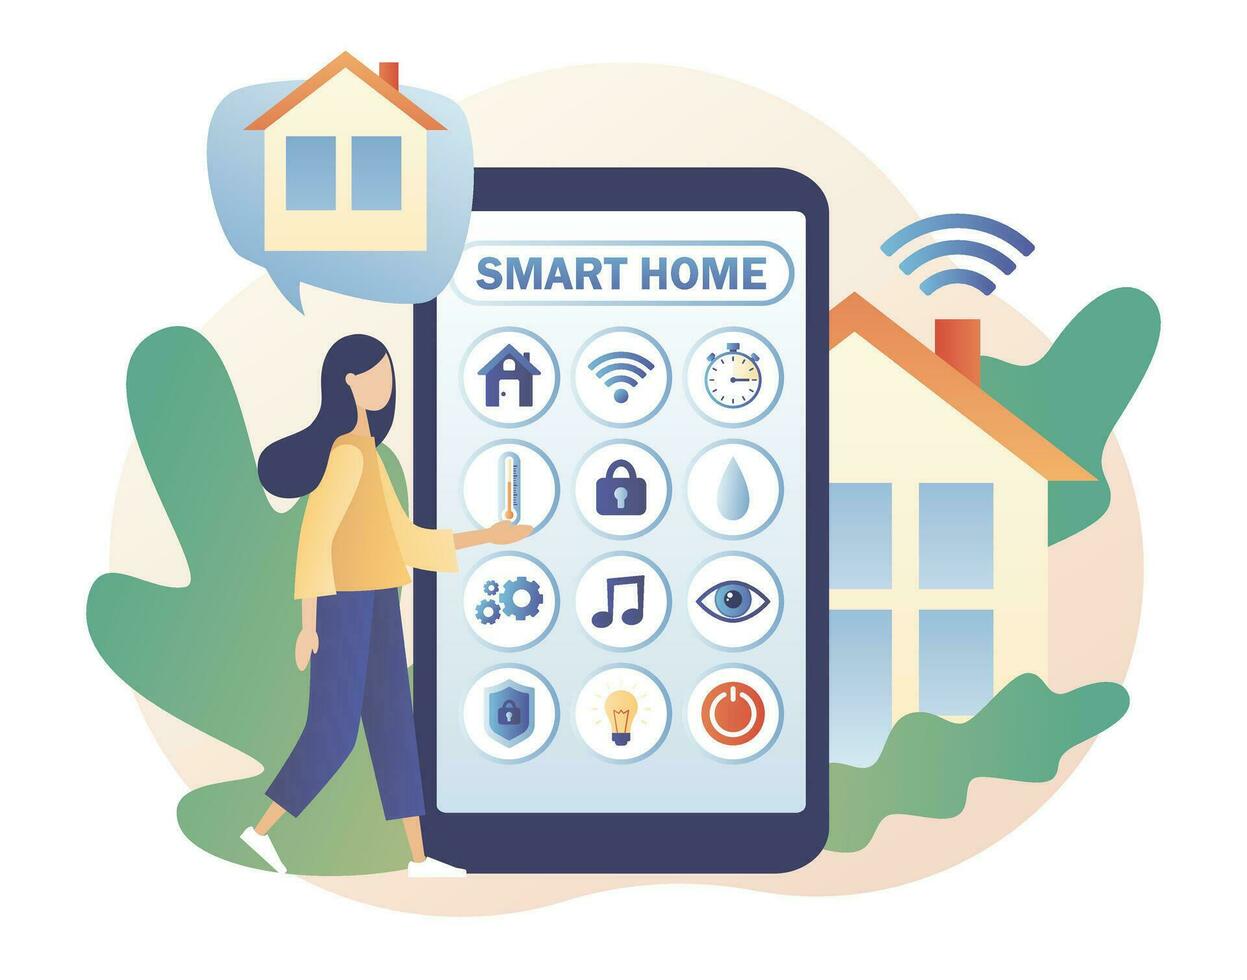 Smart home concept. Tiny woman control of lighting, heating, ventilation and air conditioning, security and video surveillance with smartphone app. Modern flat cartoon style. Vector illustration